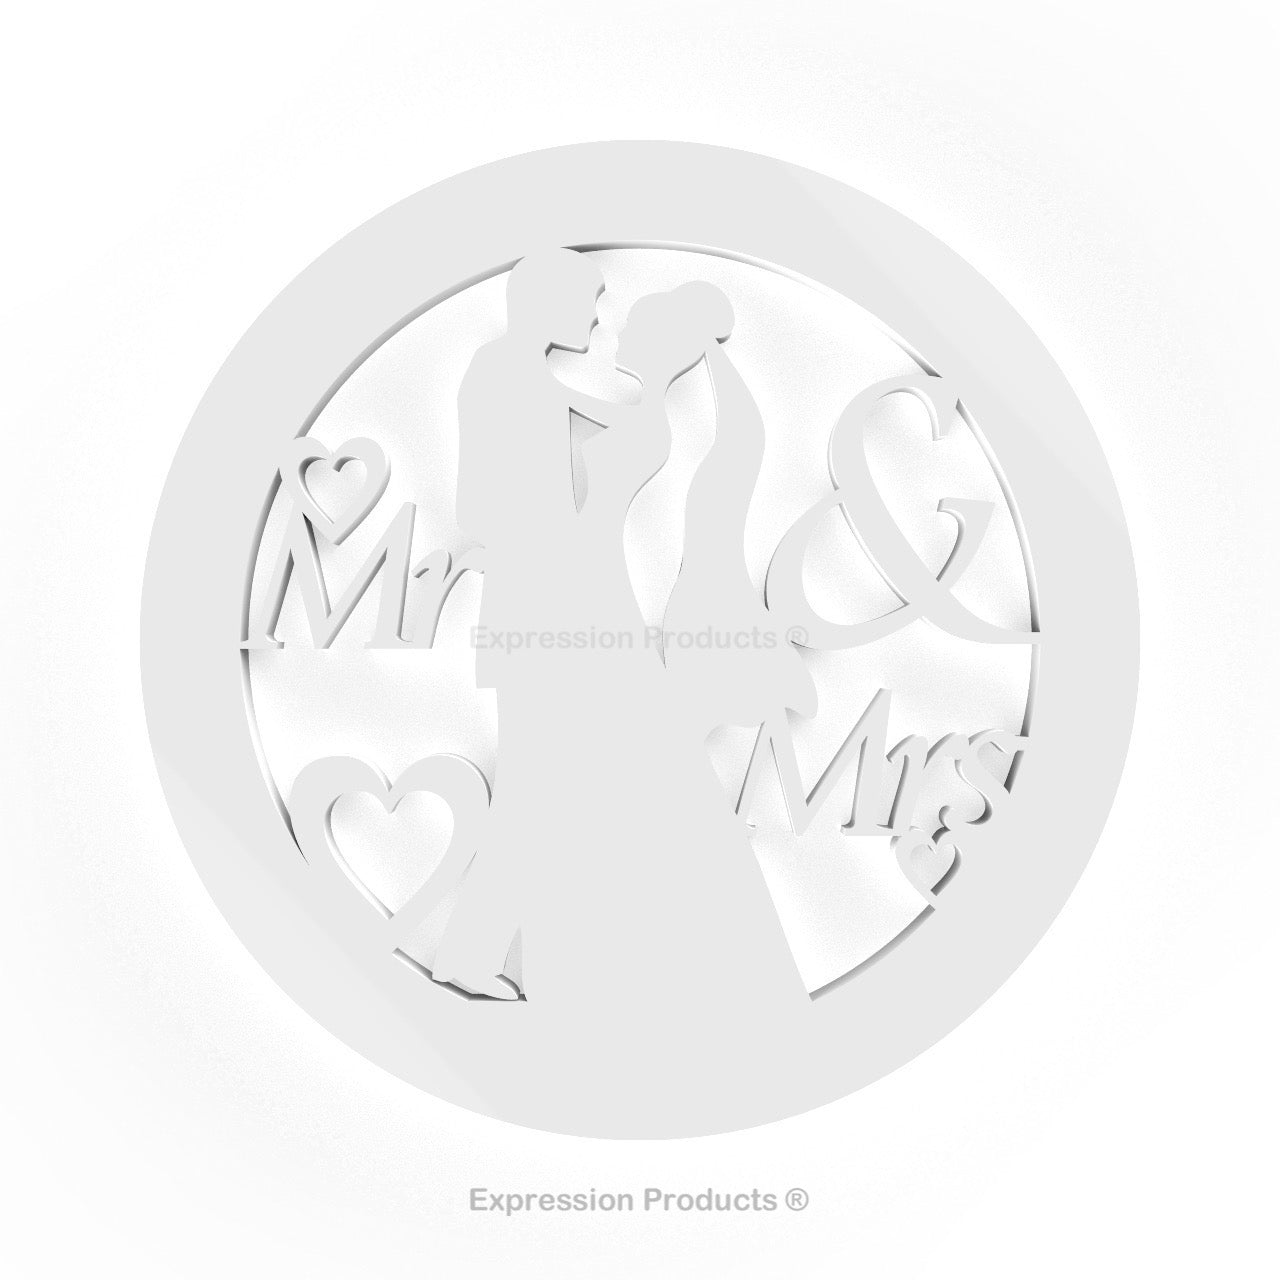 6 - Wedding Drink Coasters - Black or White Acrylic Wedding Table Decorations - Expression Products Ltd